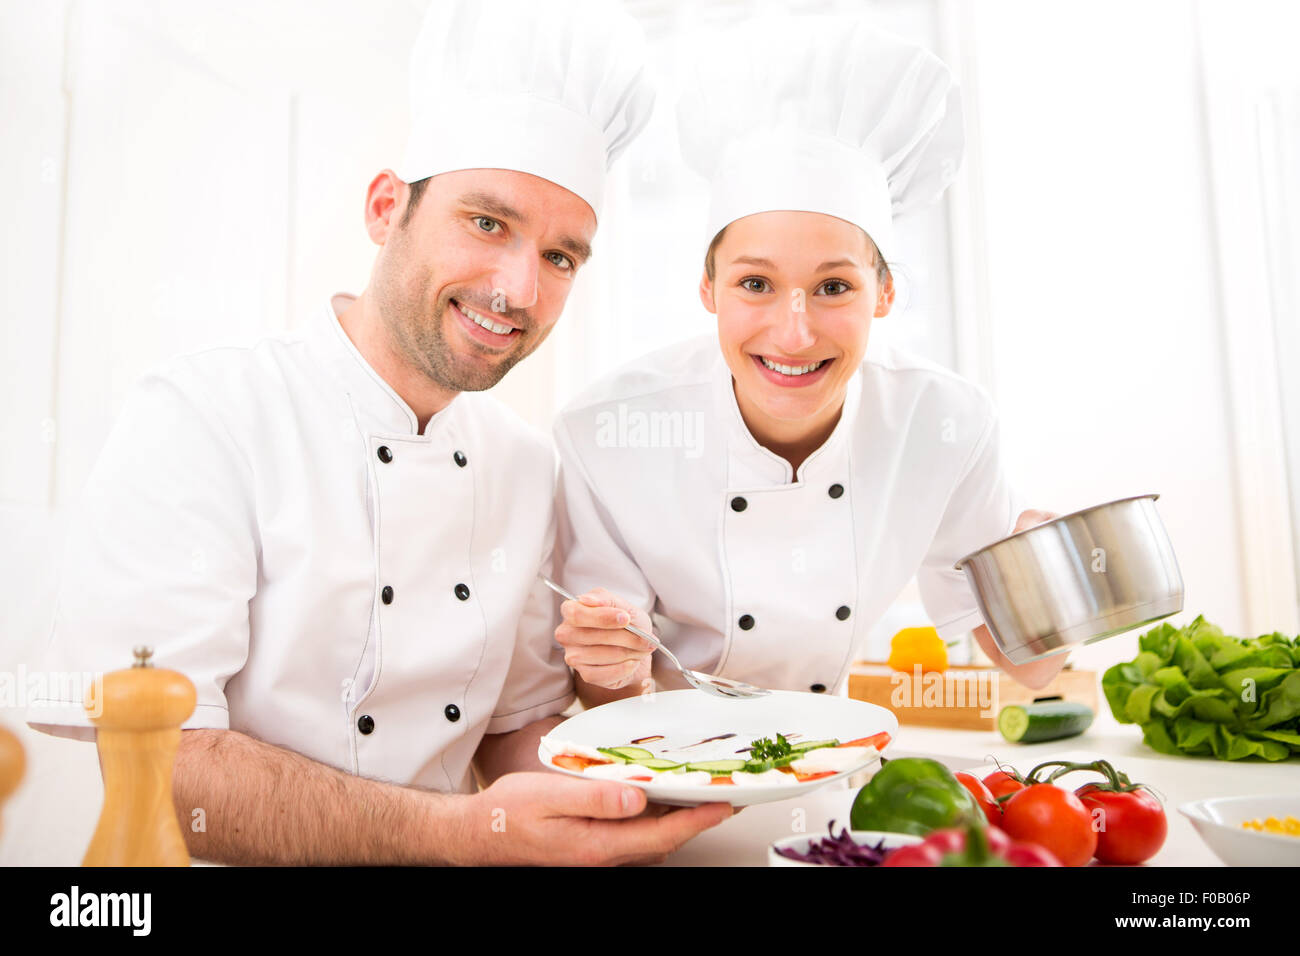 View of Young attractives professionals chefs cooking together Stock Photo